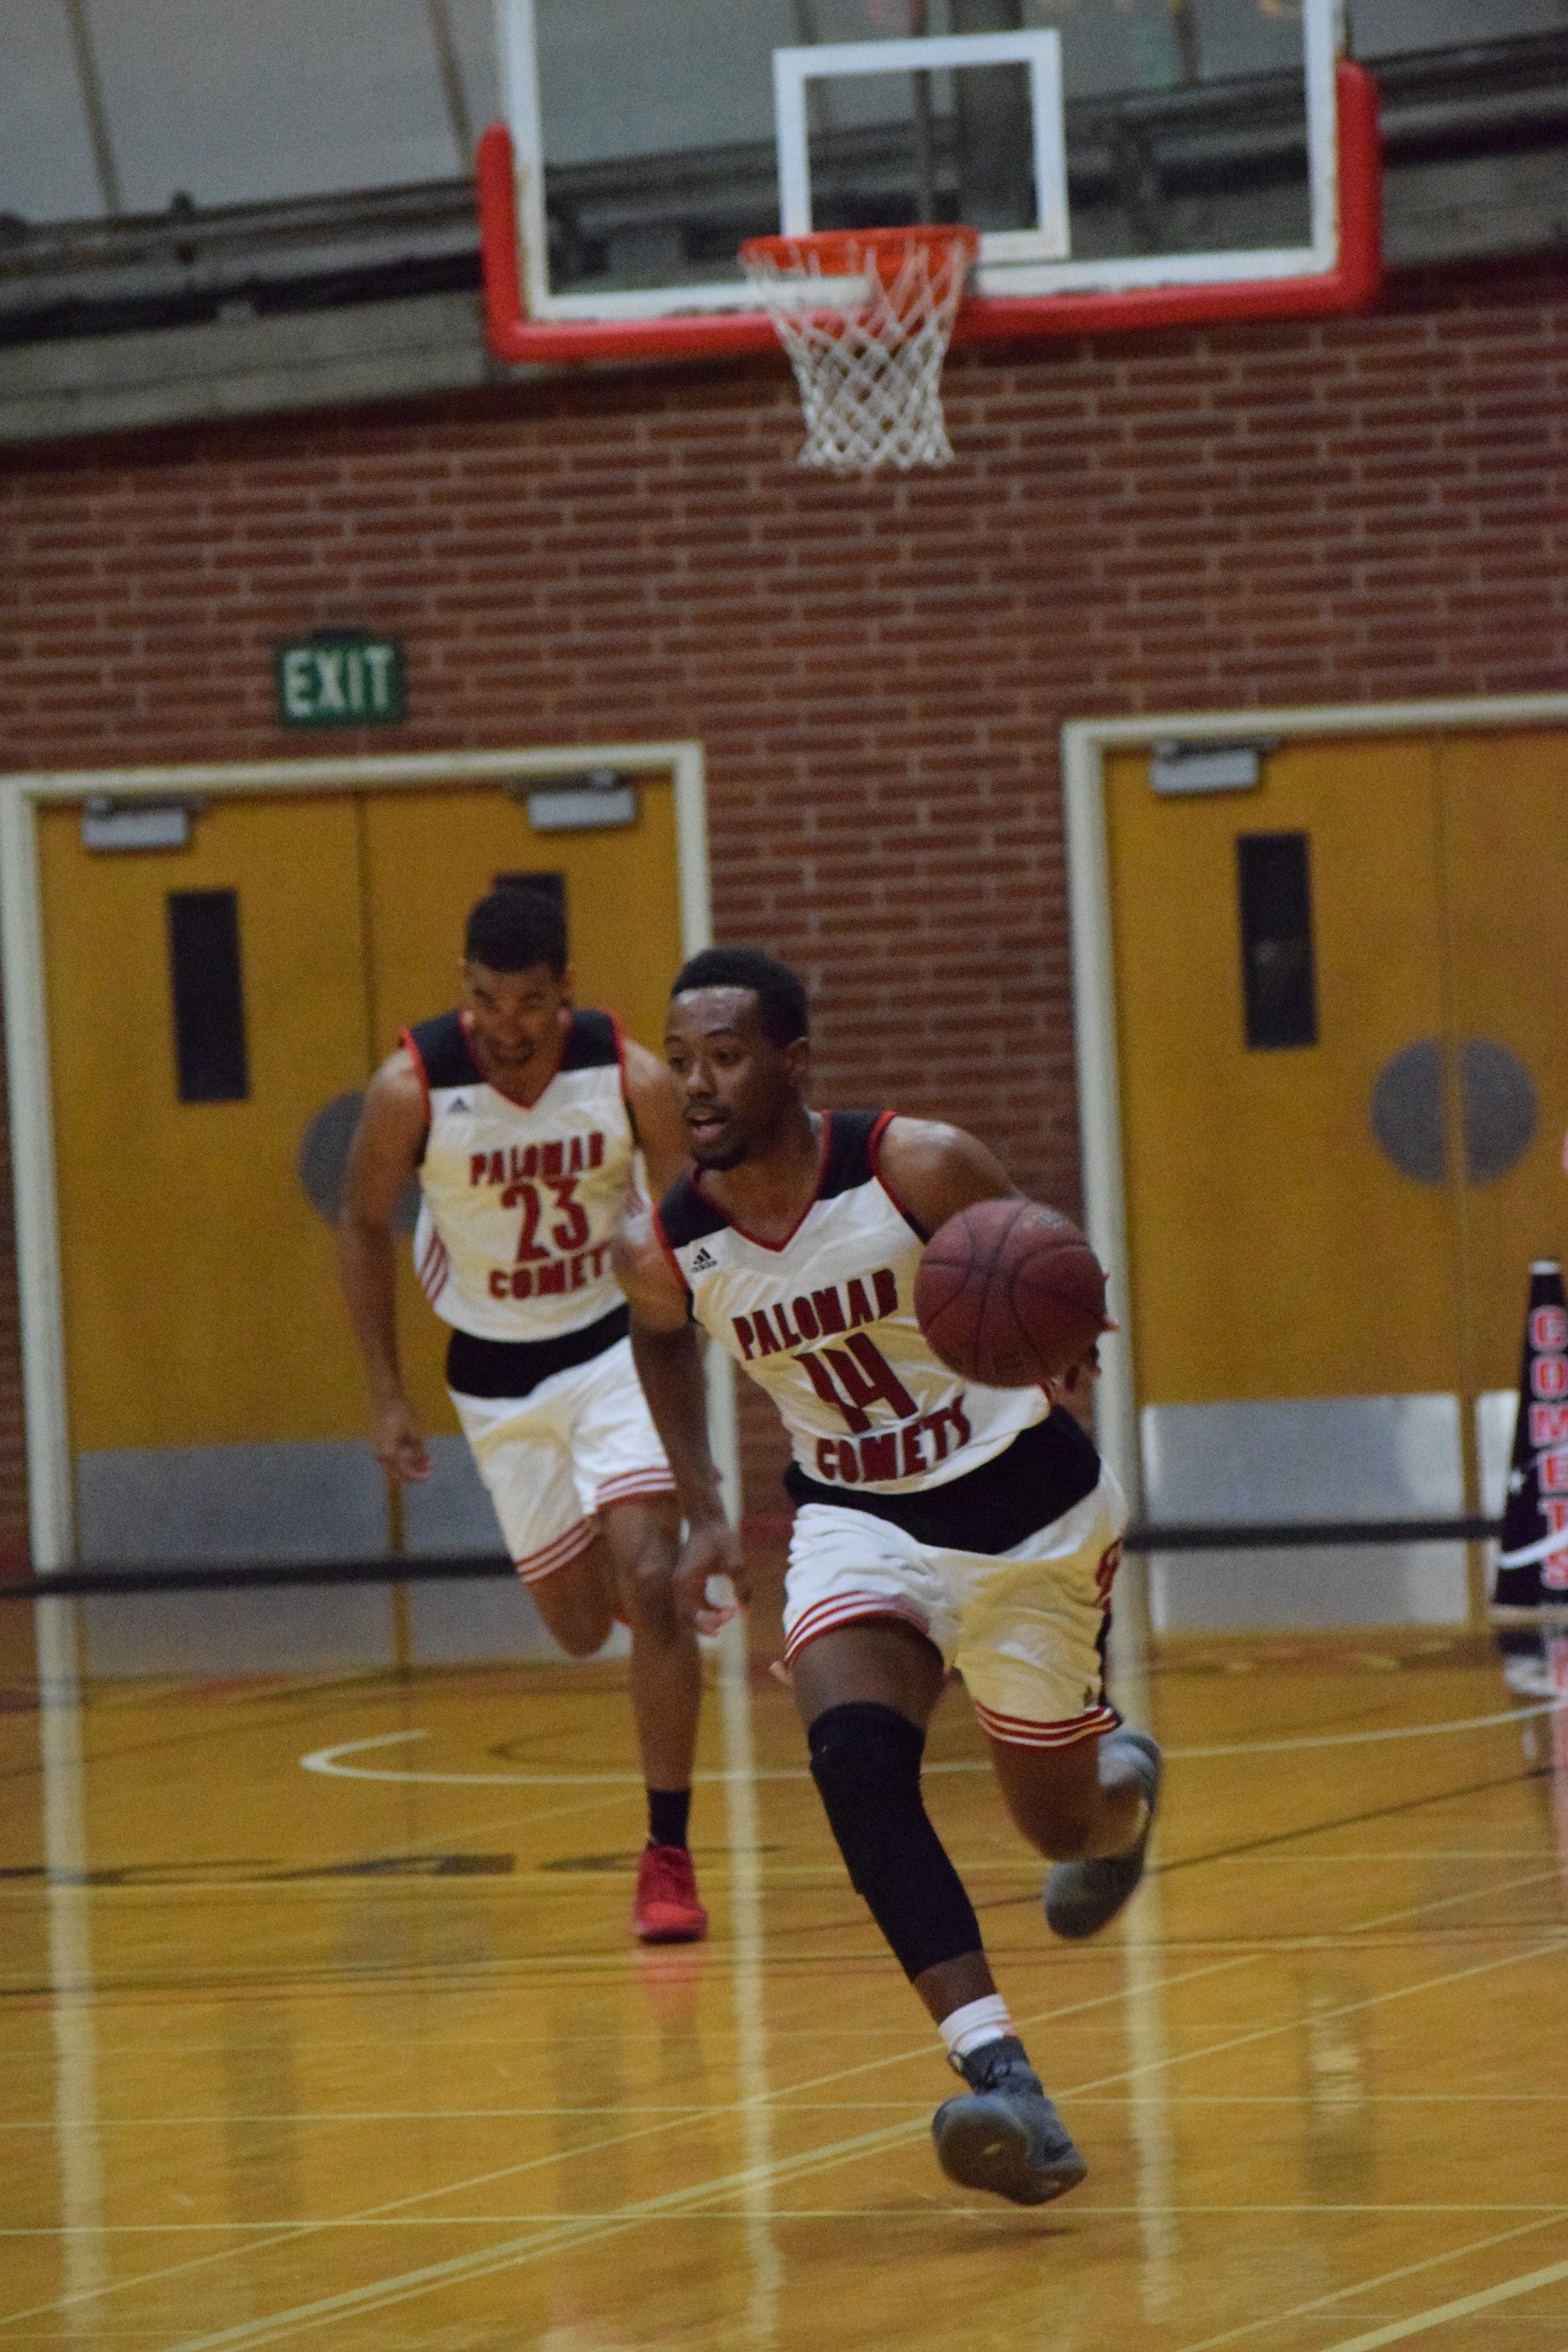 Palomar Comet basketball player number 14, LaVale Coleman, running the ball down to the opposite end of the court to score a point with number 23, Michael Chatman, hard on his heels. Feb 2. Emily Whetstone/The Telescope